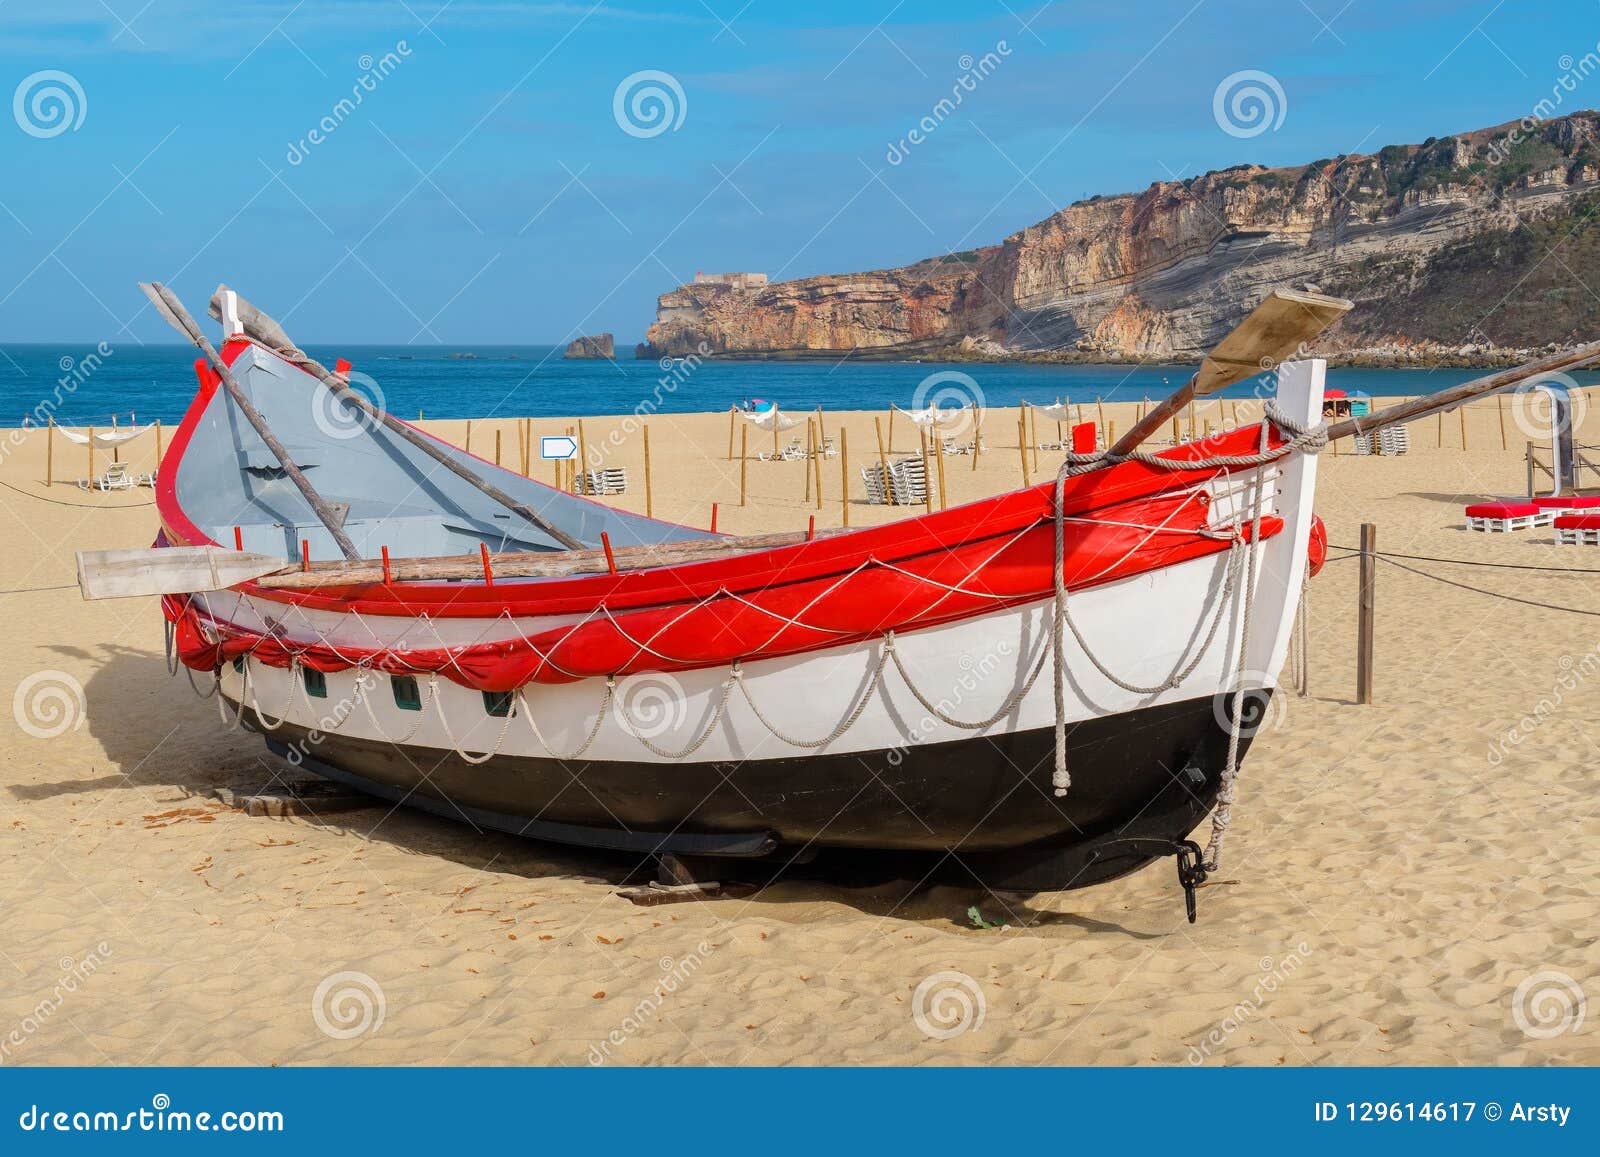 Fishing Boat. Nazare, Portugal Stock Image - Image of ...